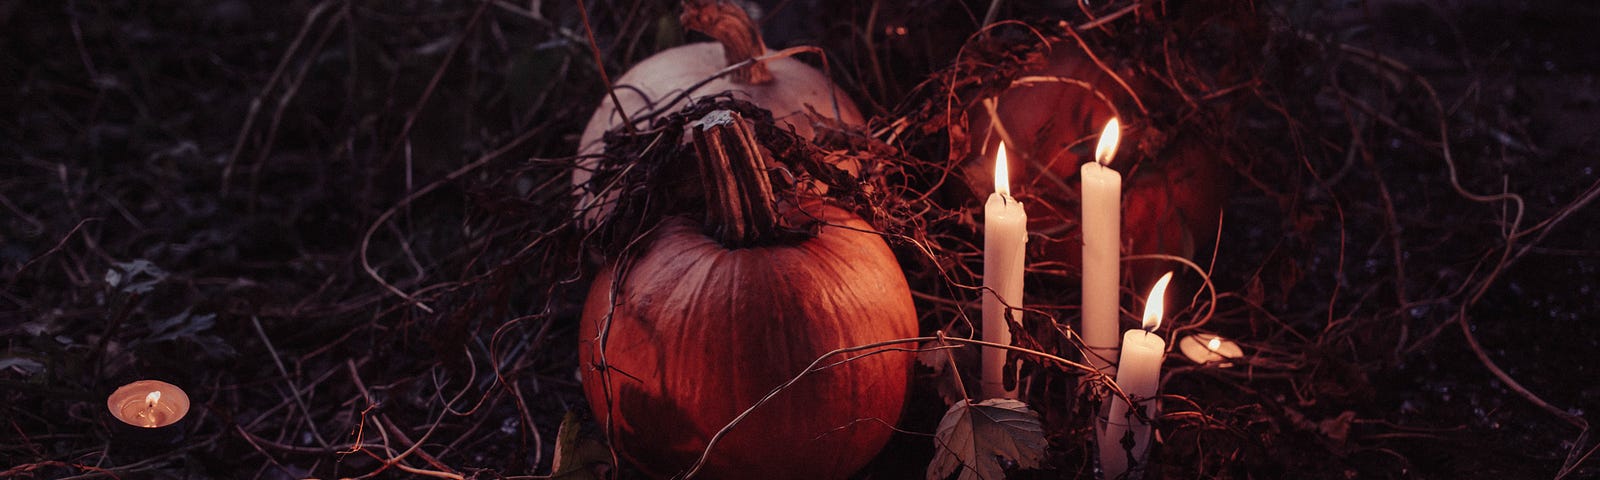 Pumpkins aglow by candlelight in a thorny underbrush.